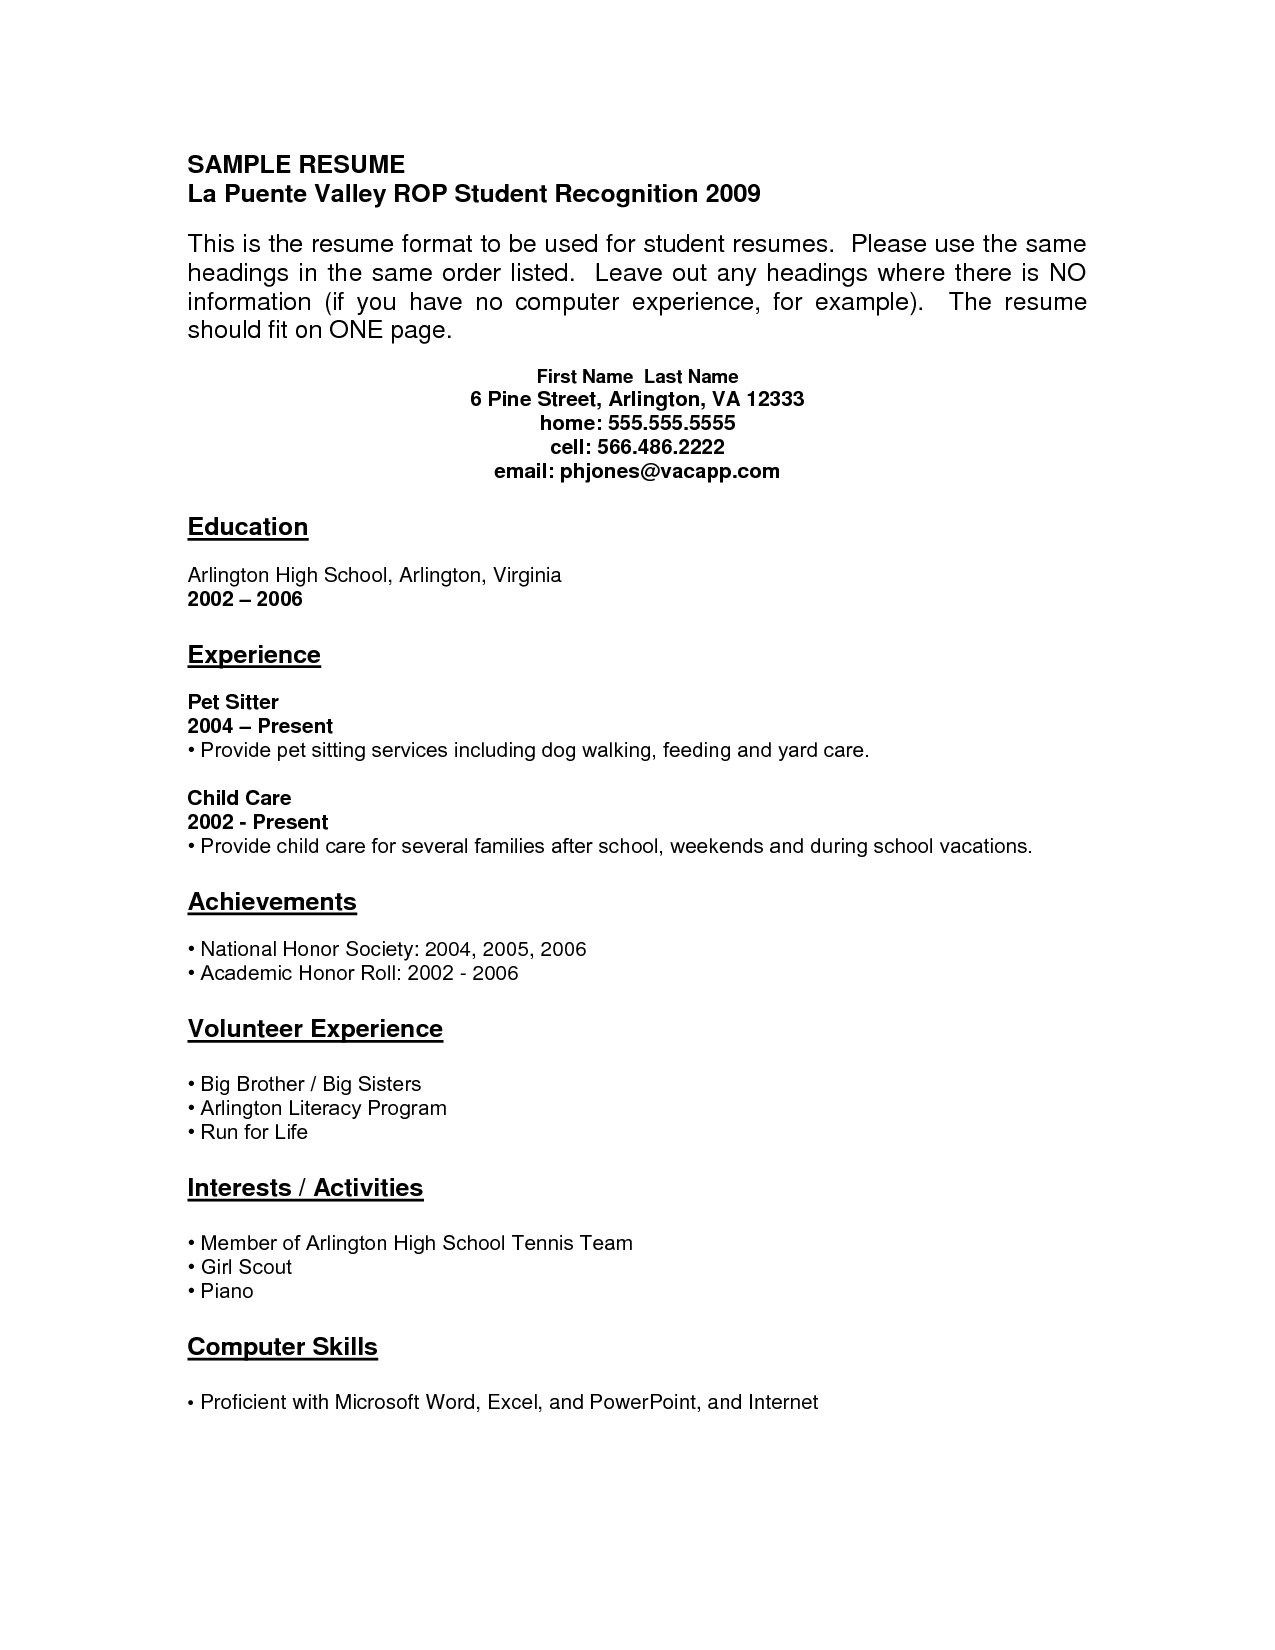 Resume Template for High School Student No Work Experience Resume Examples with No Job Experience – Resume Templates Job …